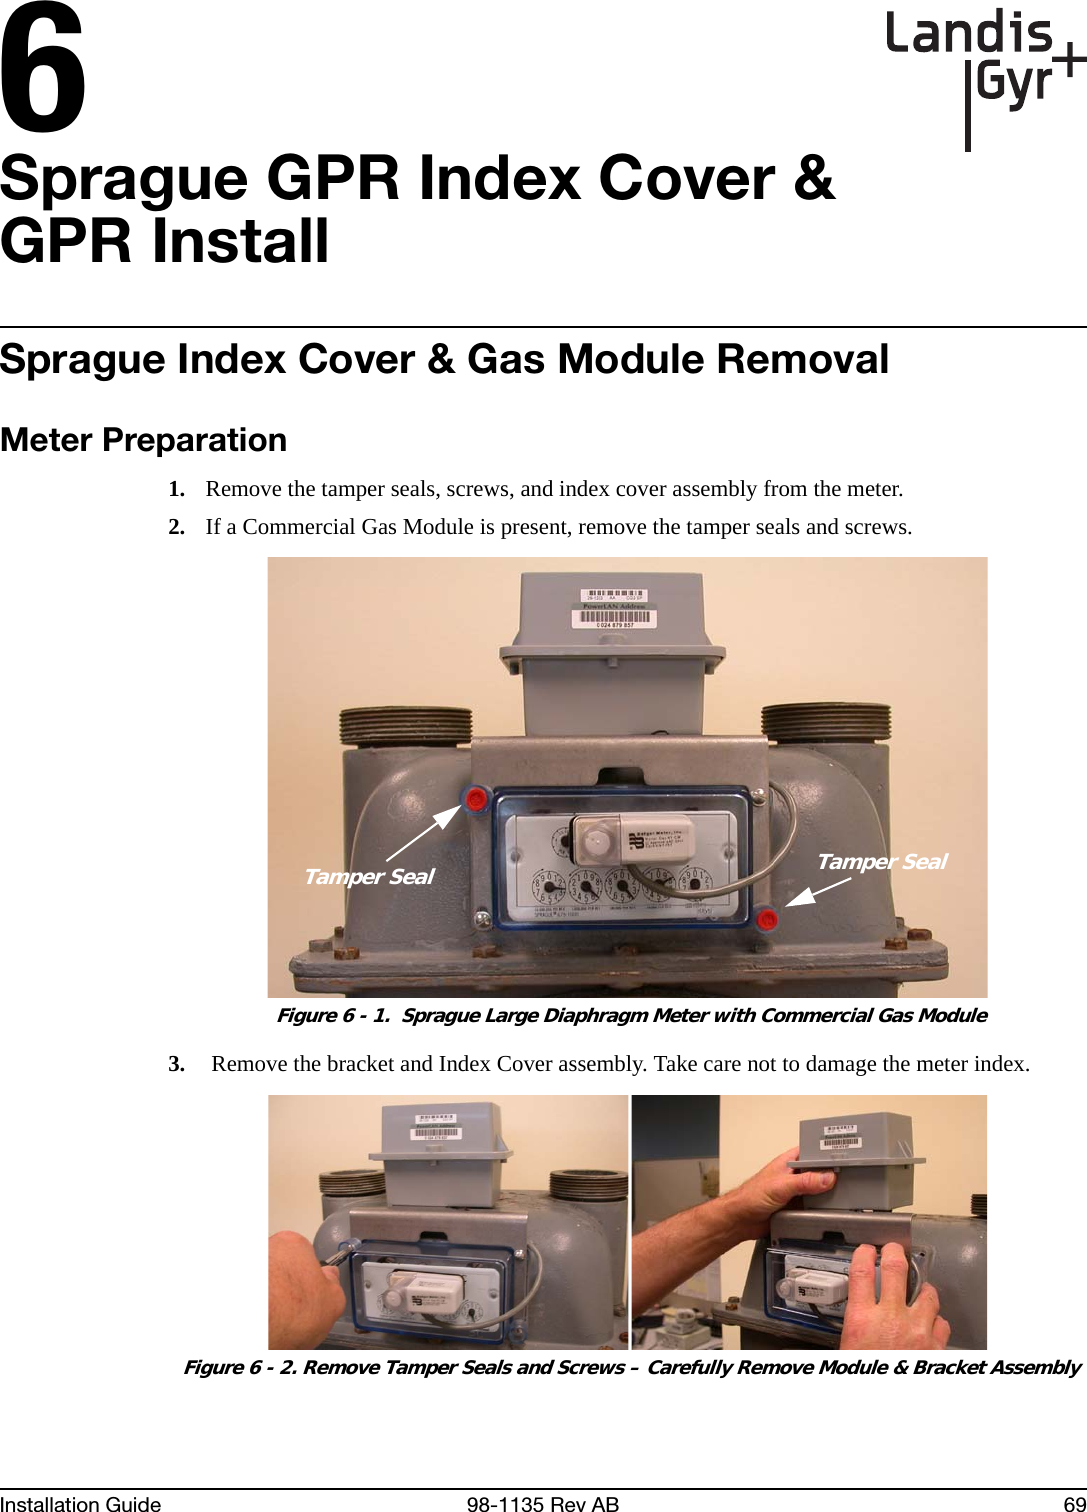 6Installation Guide 98-1135 Rev AB 69Sprague GPR Index Cover &amp; GPR InstallSprague Index Cover &amp; Gas Module RemovalMeter Preparation1. Remove the tamper seals, screws, and index cover assembly from the meter.2. If a Commercial Gas Module is present, remove the tamper seals and screws. Figure 6 - 1.  Sprague Large Diaphragm Meter with Commercial Gas Module3.  Remove the bracket and Index Cover assembly. Take care not to damage the meter index. Figure 6 - 2. Remove Tamper Seals and Screws – Carefully Remove Module &amp; Bracket AssemblyTamper SealTamper Seal